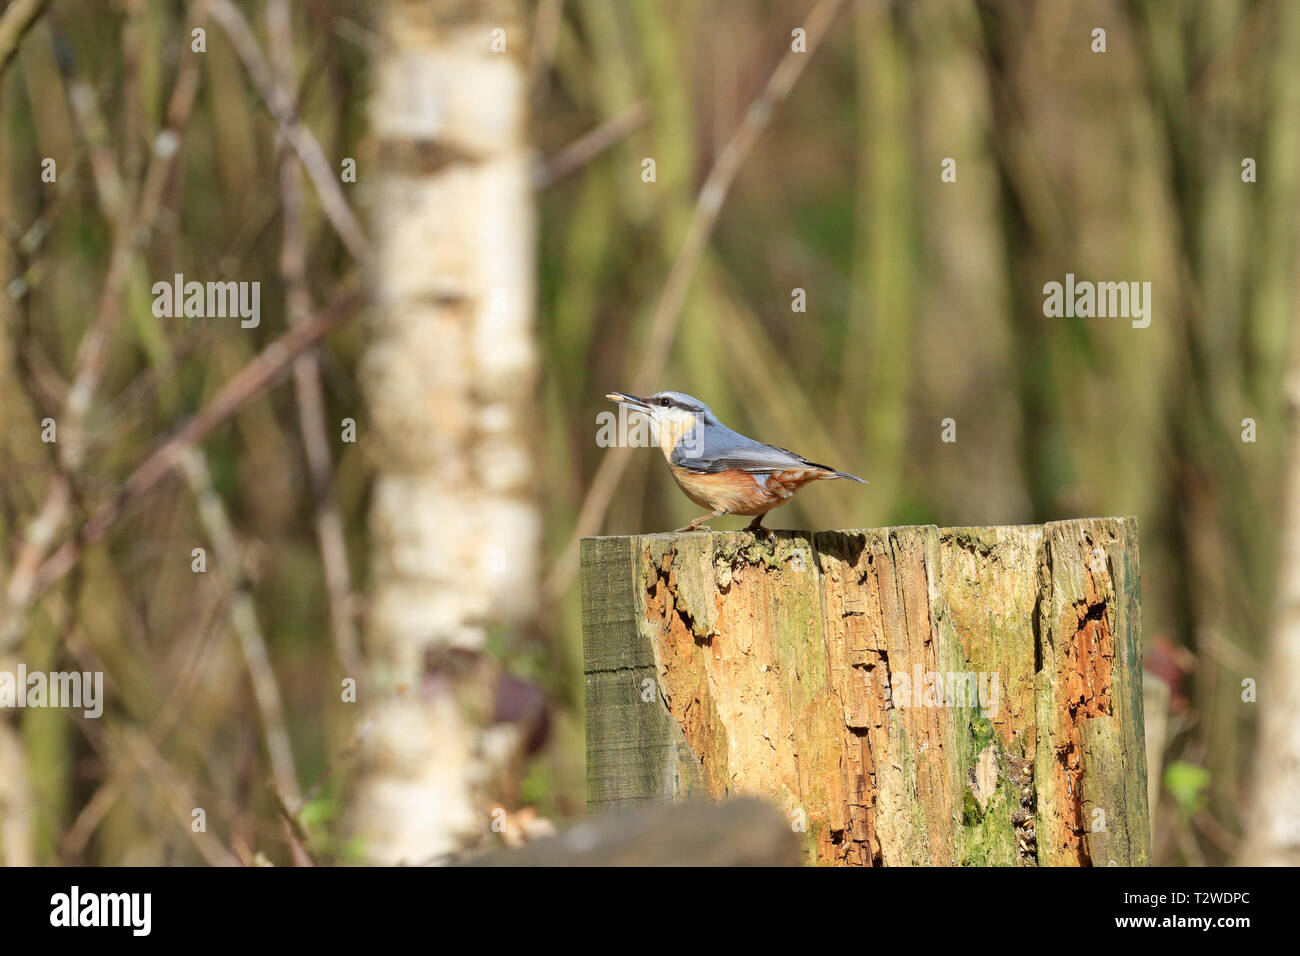 Nuthatch, Sitta europaea eating peanuts on a decaying tree stump, England, UK. Stock Photo